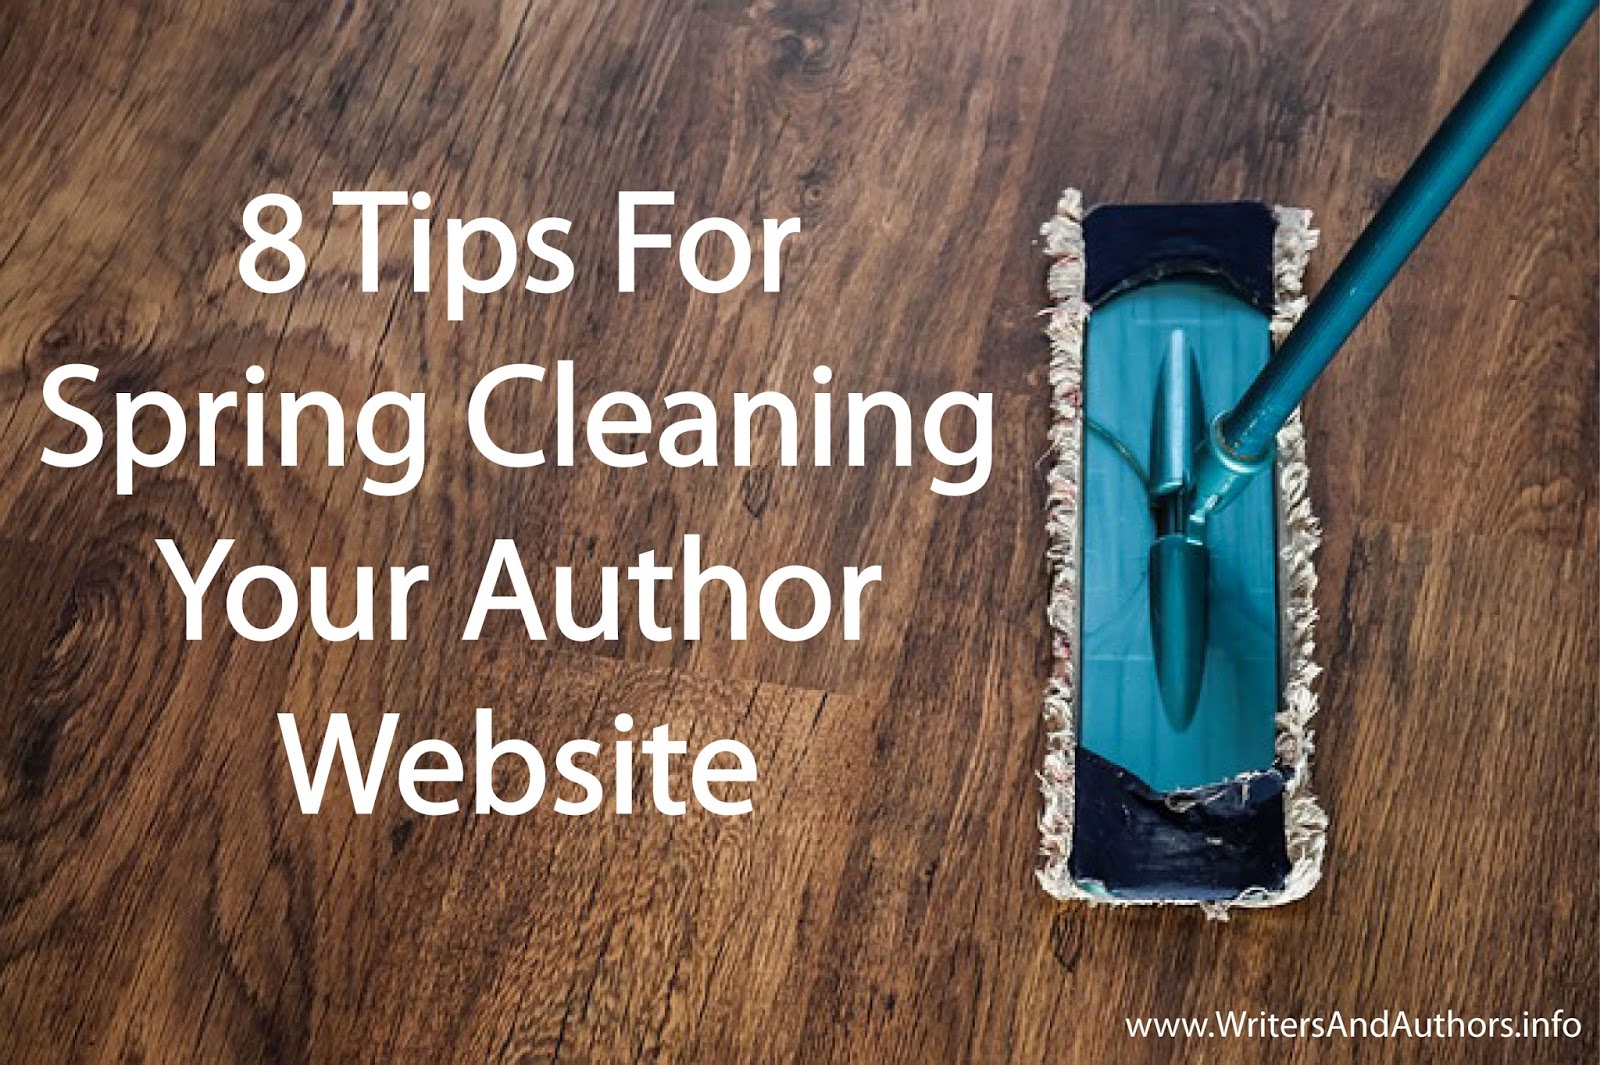 8 Tips For Spring Cleaning Your Author Website, www.writersandauthors.info